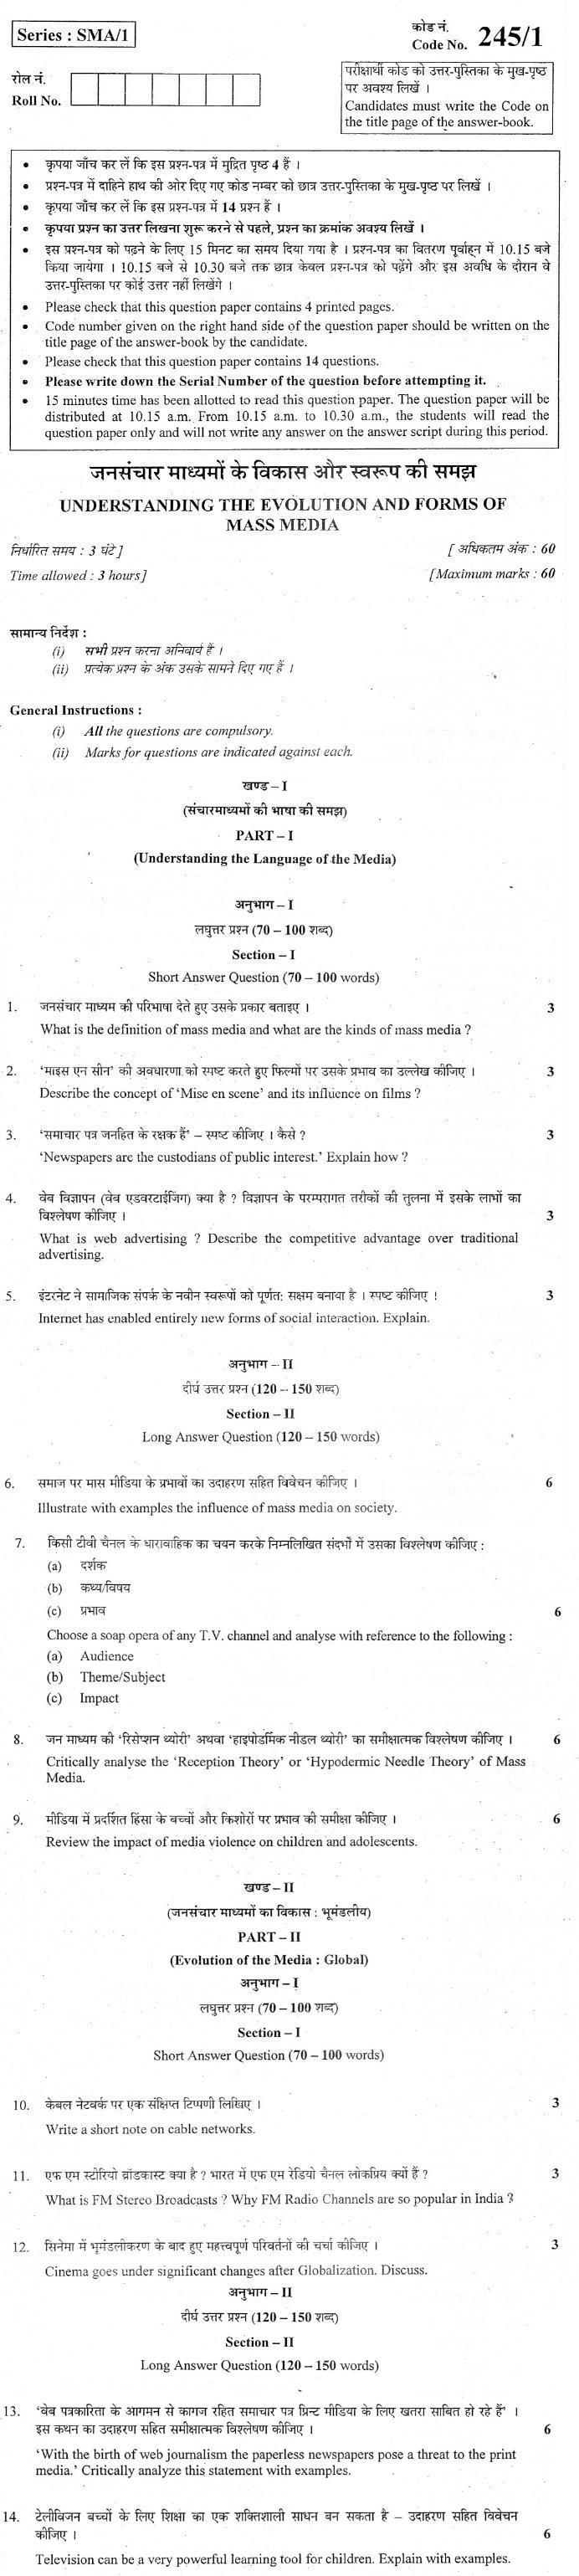 CBSE Class XII Previous Year Question Paper 2012 The Evolution And Forms of Mass Media